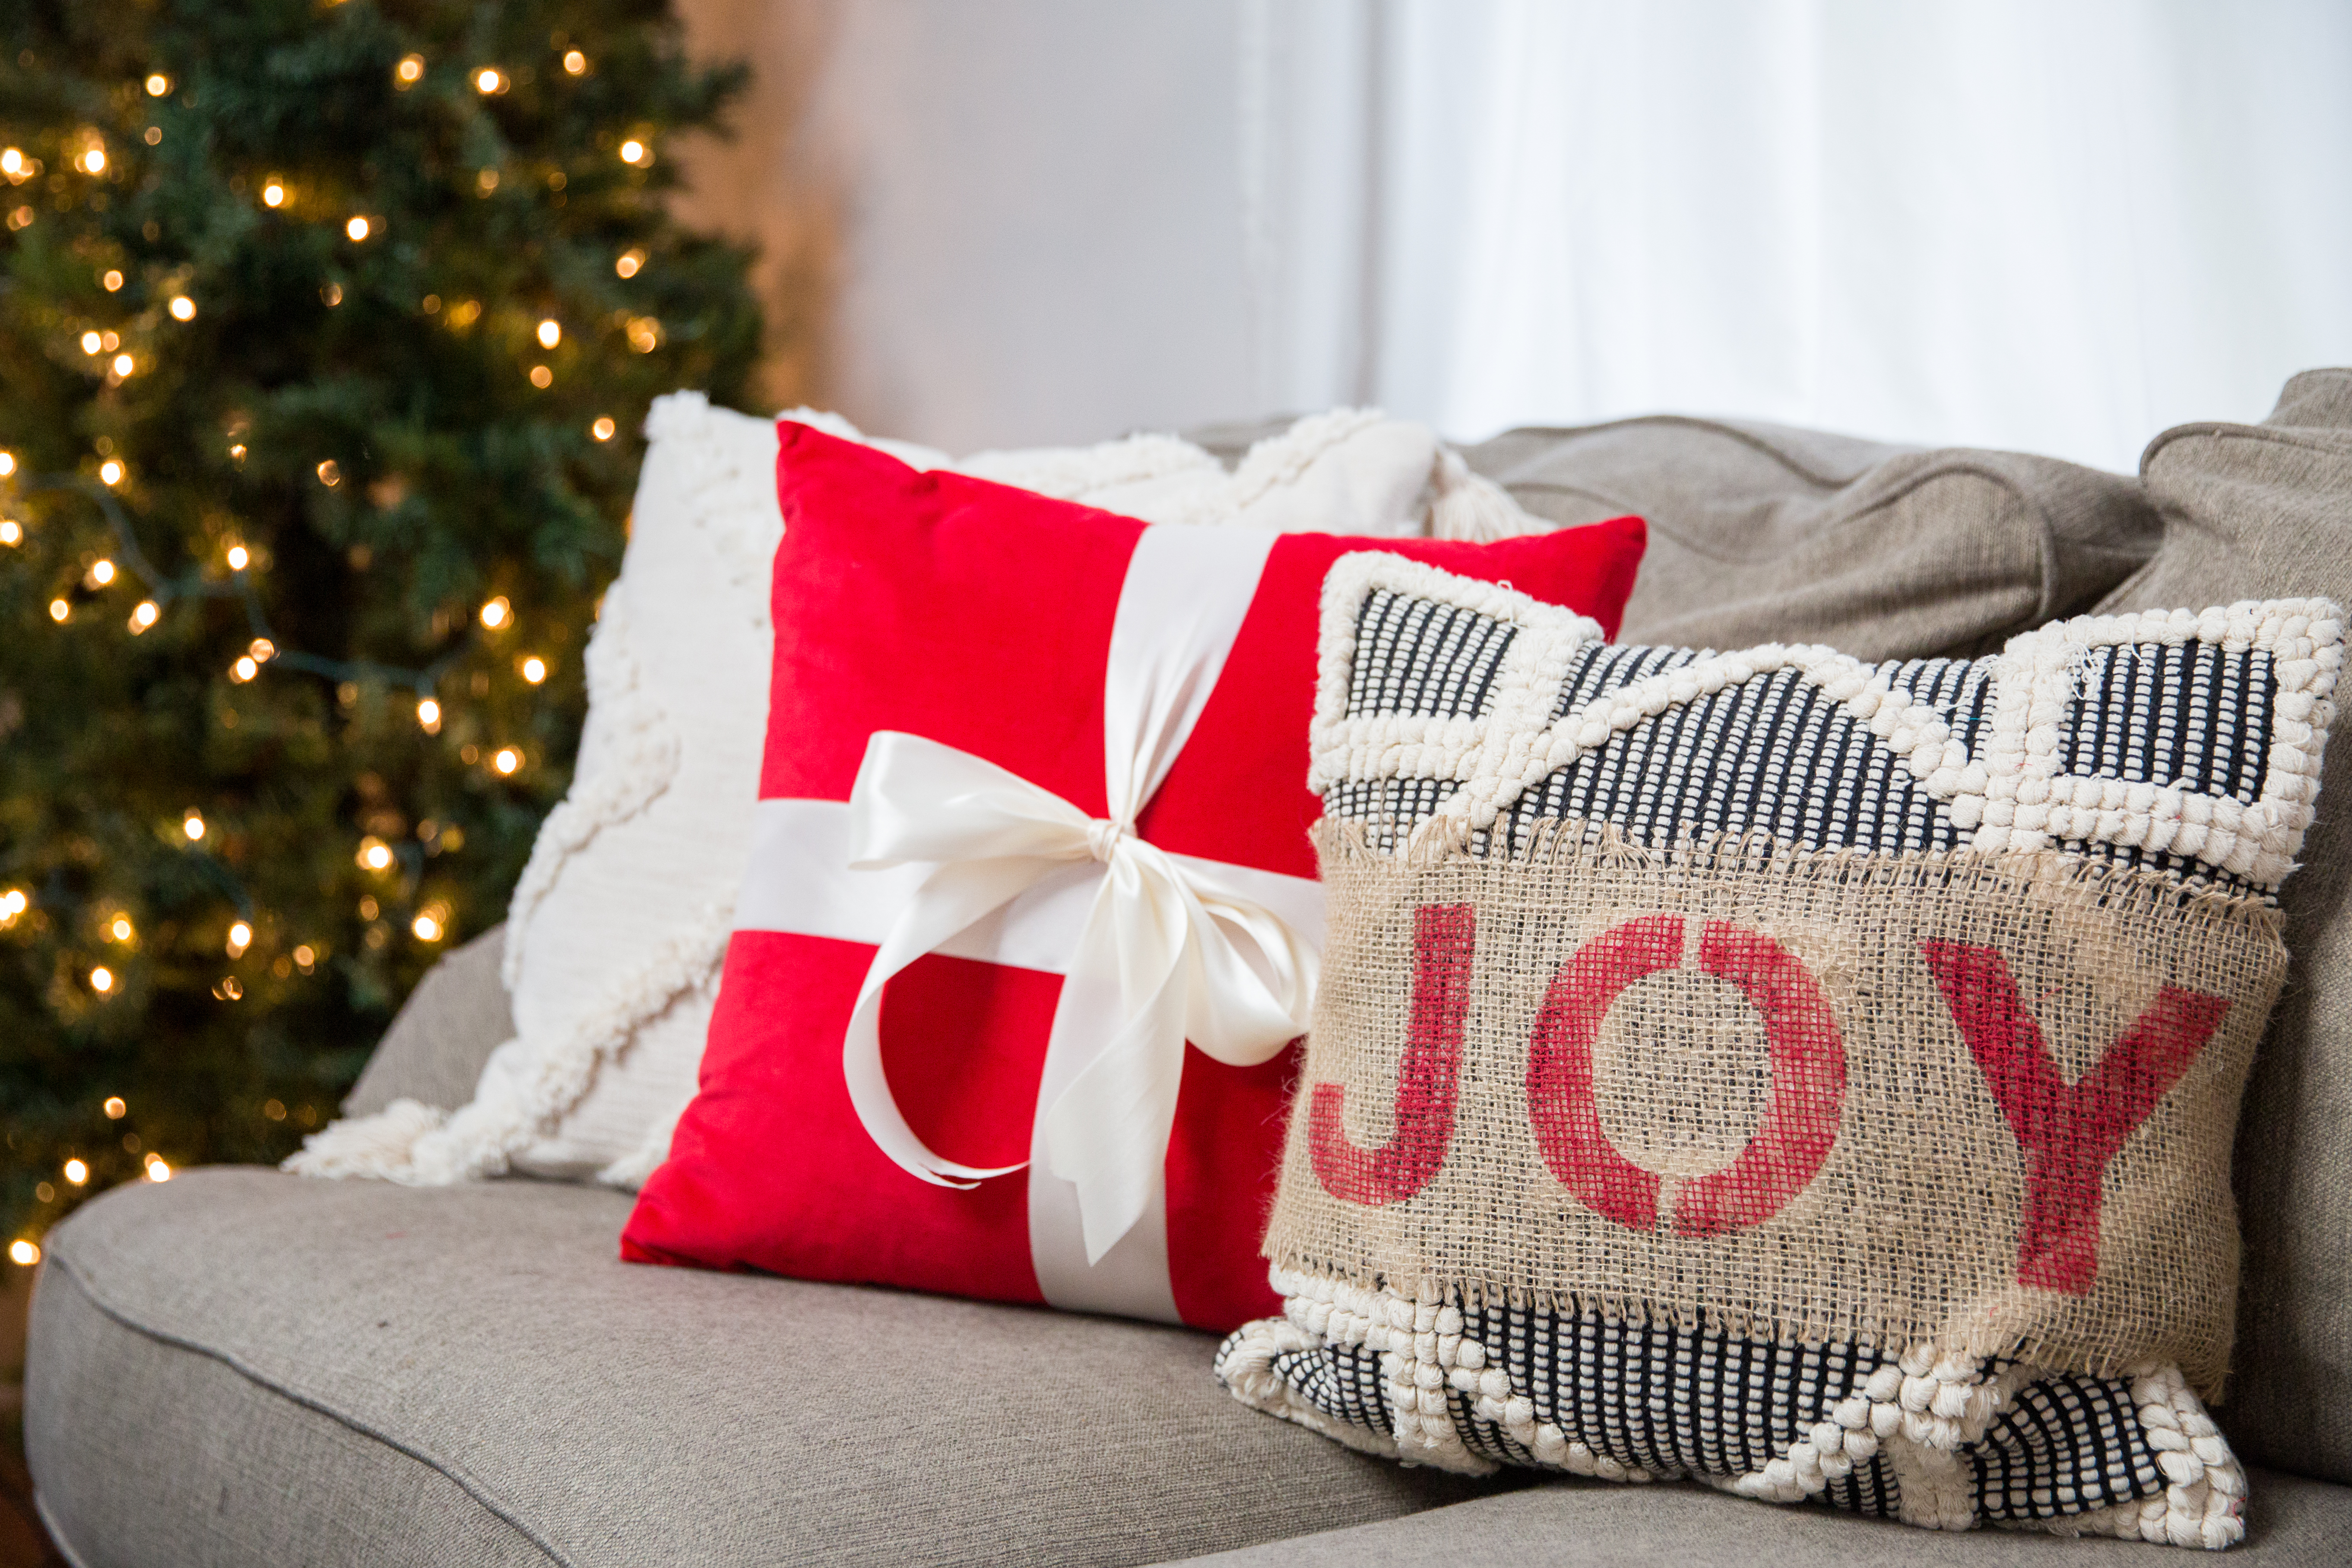 Joyshare Christmas Throw Pillow Covers 18x18 inch 4 Sets Xmas Decorations Pillow Cushion Covers Home Decorative Pillowcase for Couch Sofa Bed Breathable Linen with Hidden Zipper